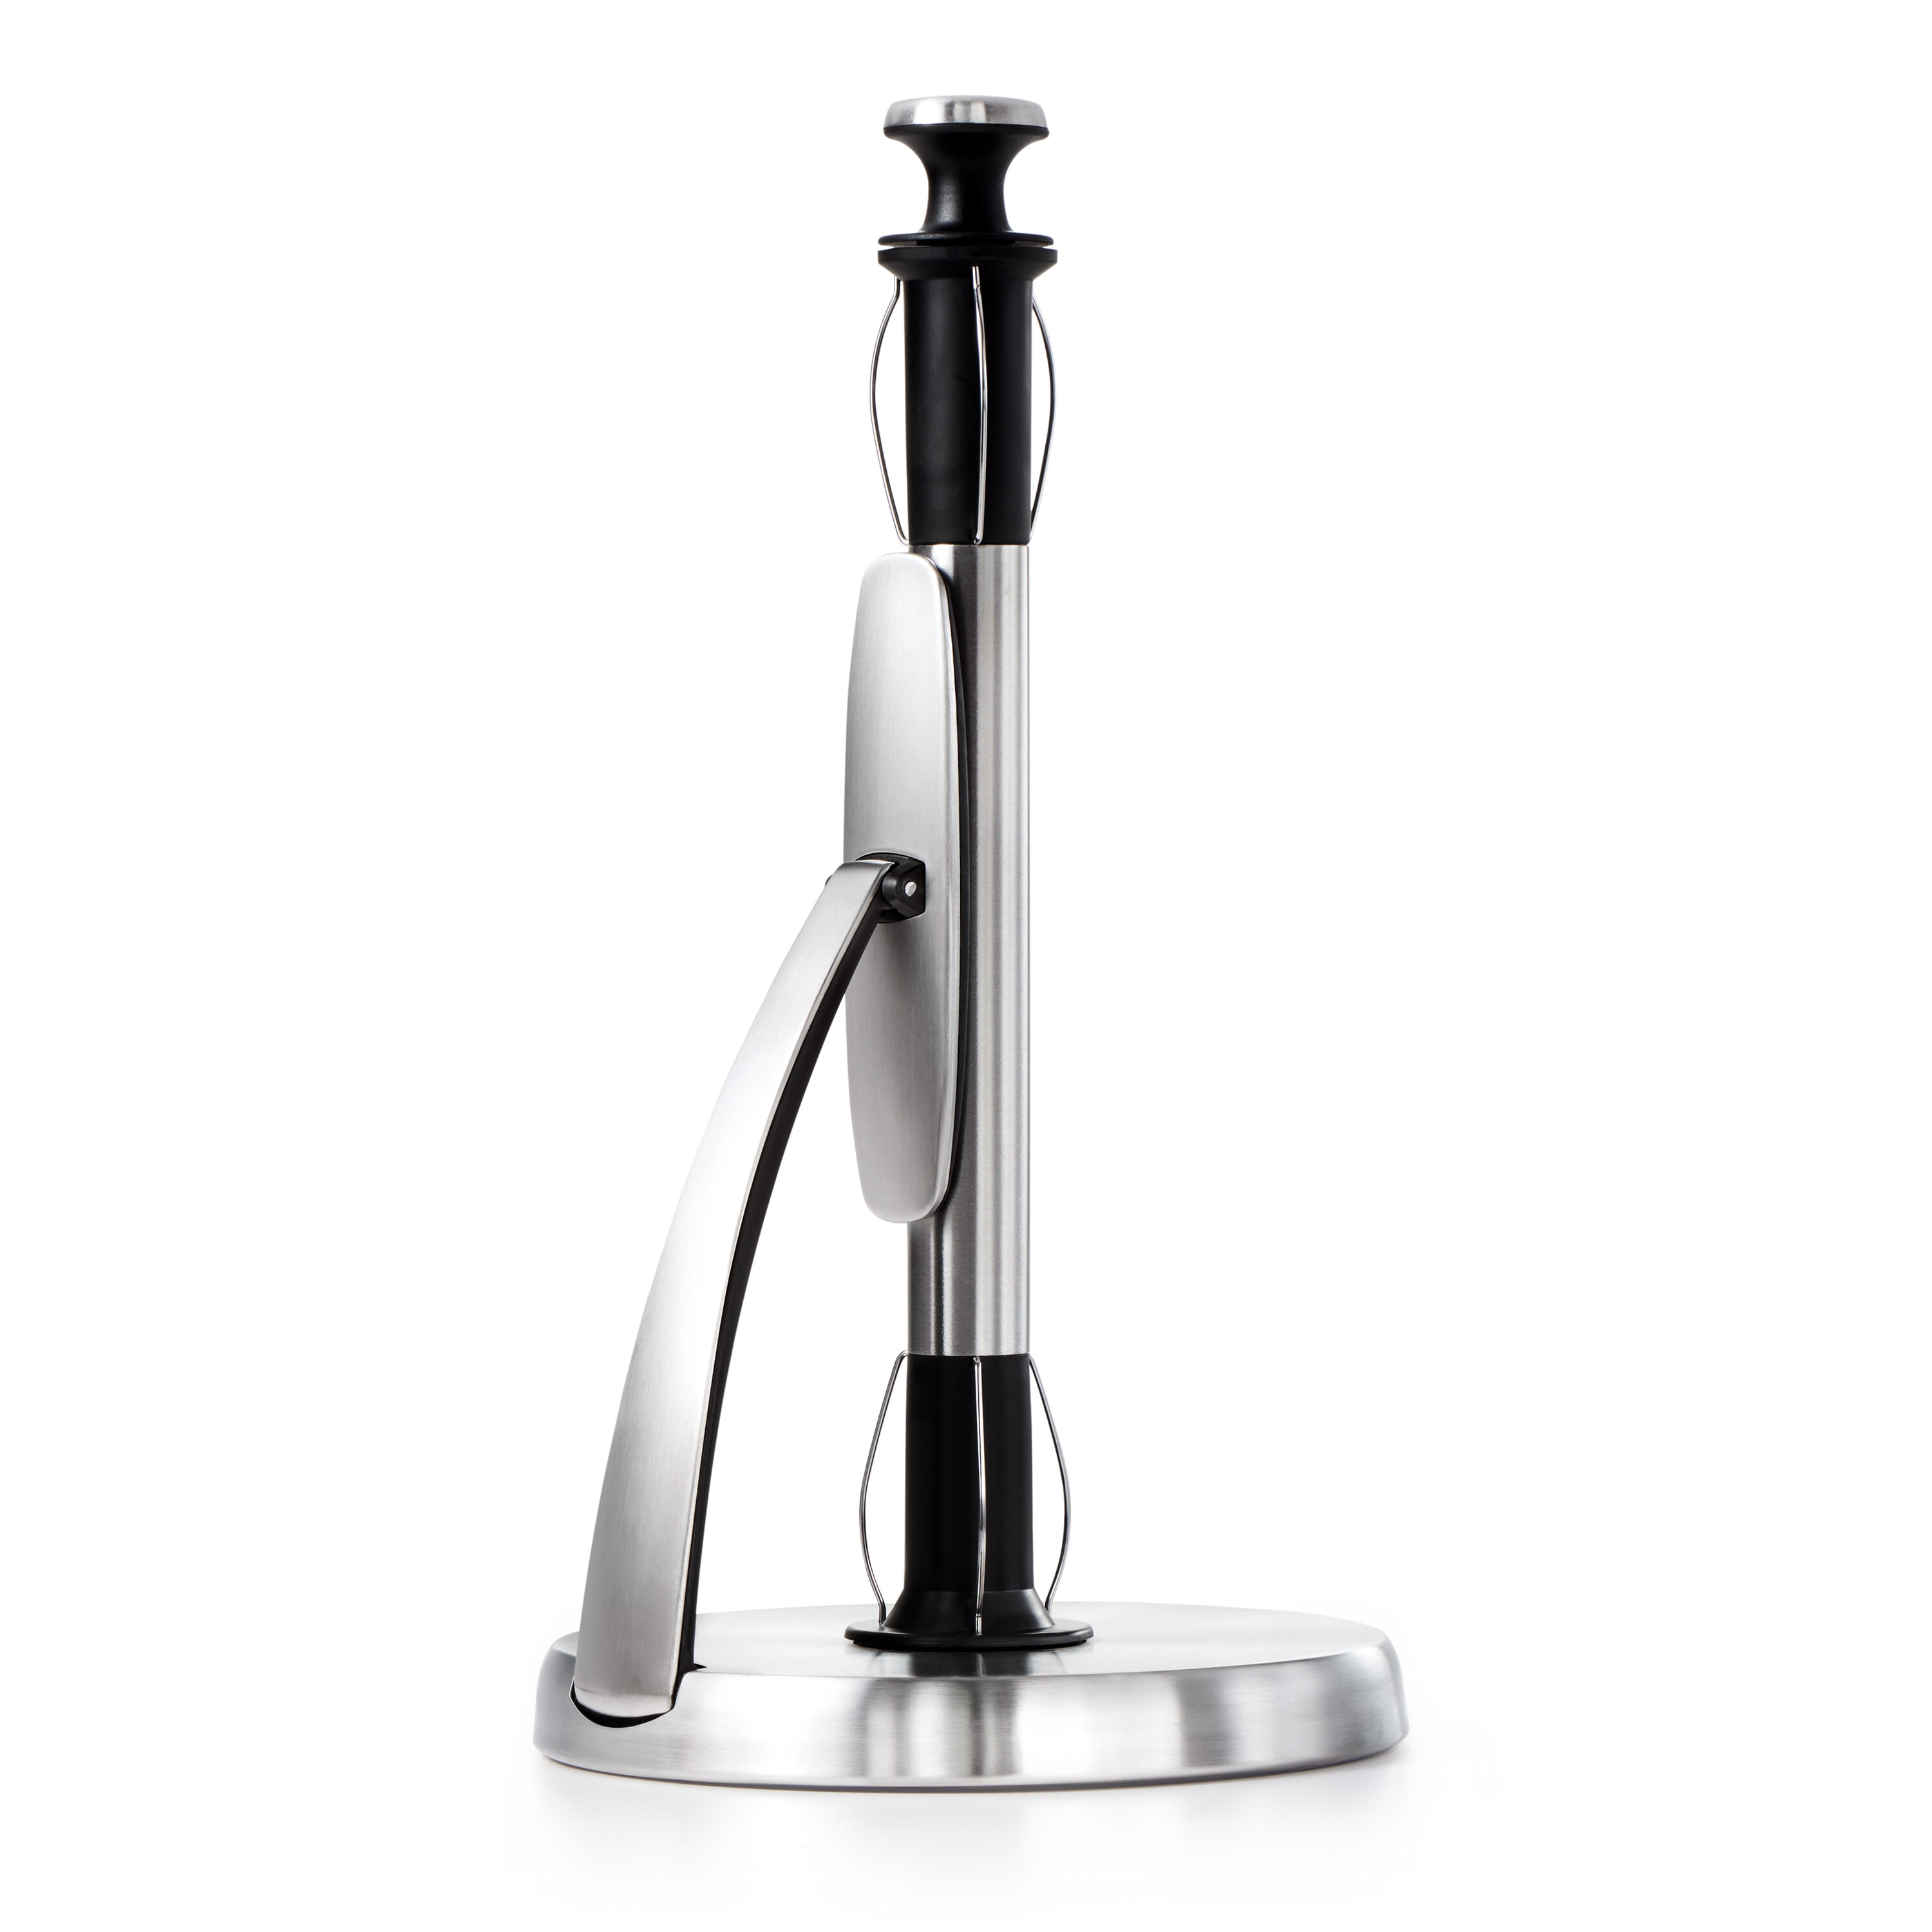 OXO Good Grips Steady Paper Towel Holder - Stainless Steel